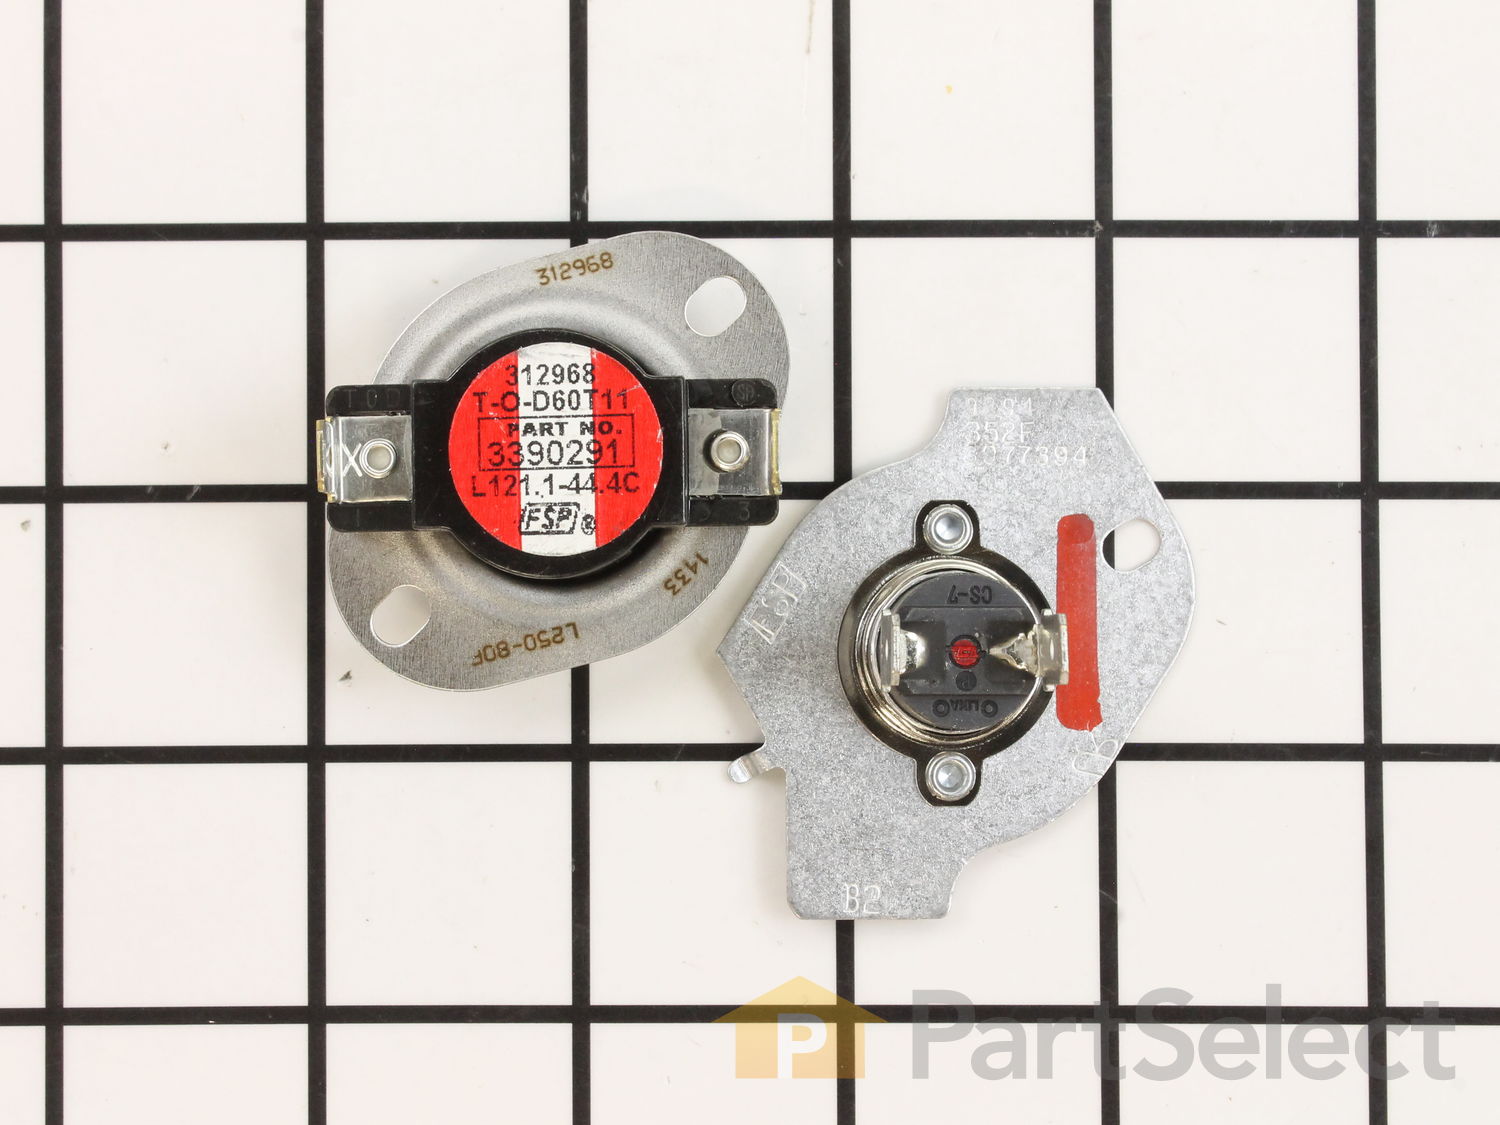 Details about   279769 Fuse Cut Off Dryer Thermostat Kit Accessories for Whirlpool for Kenmore 